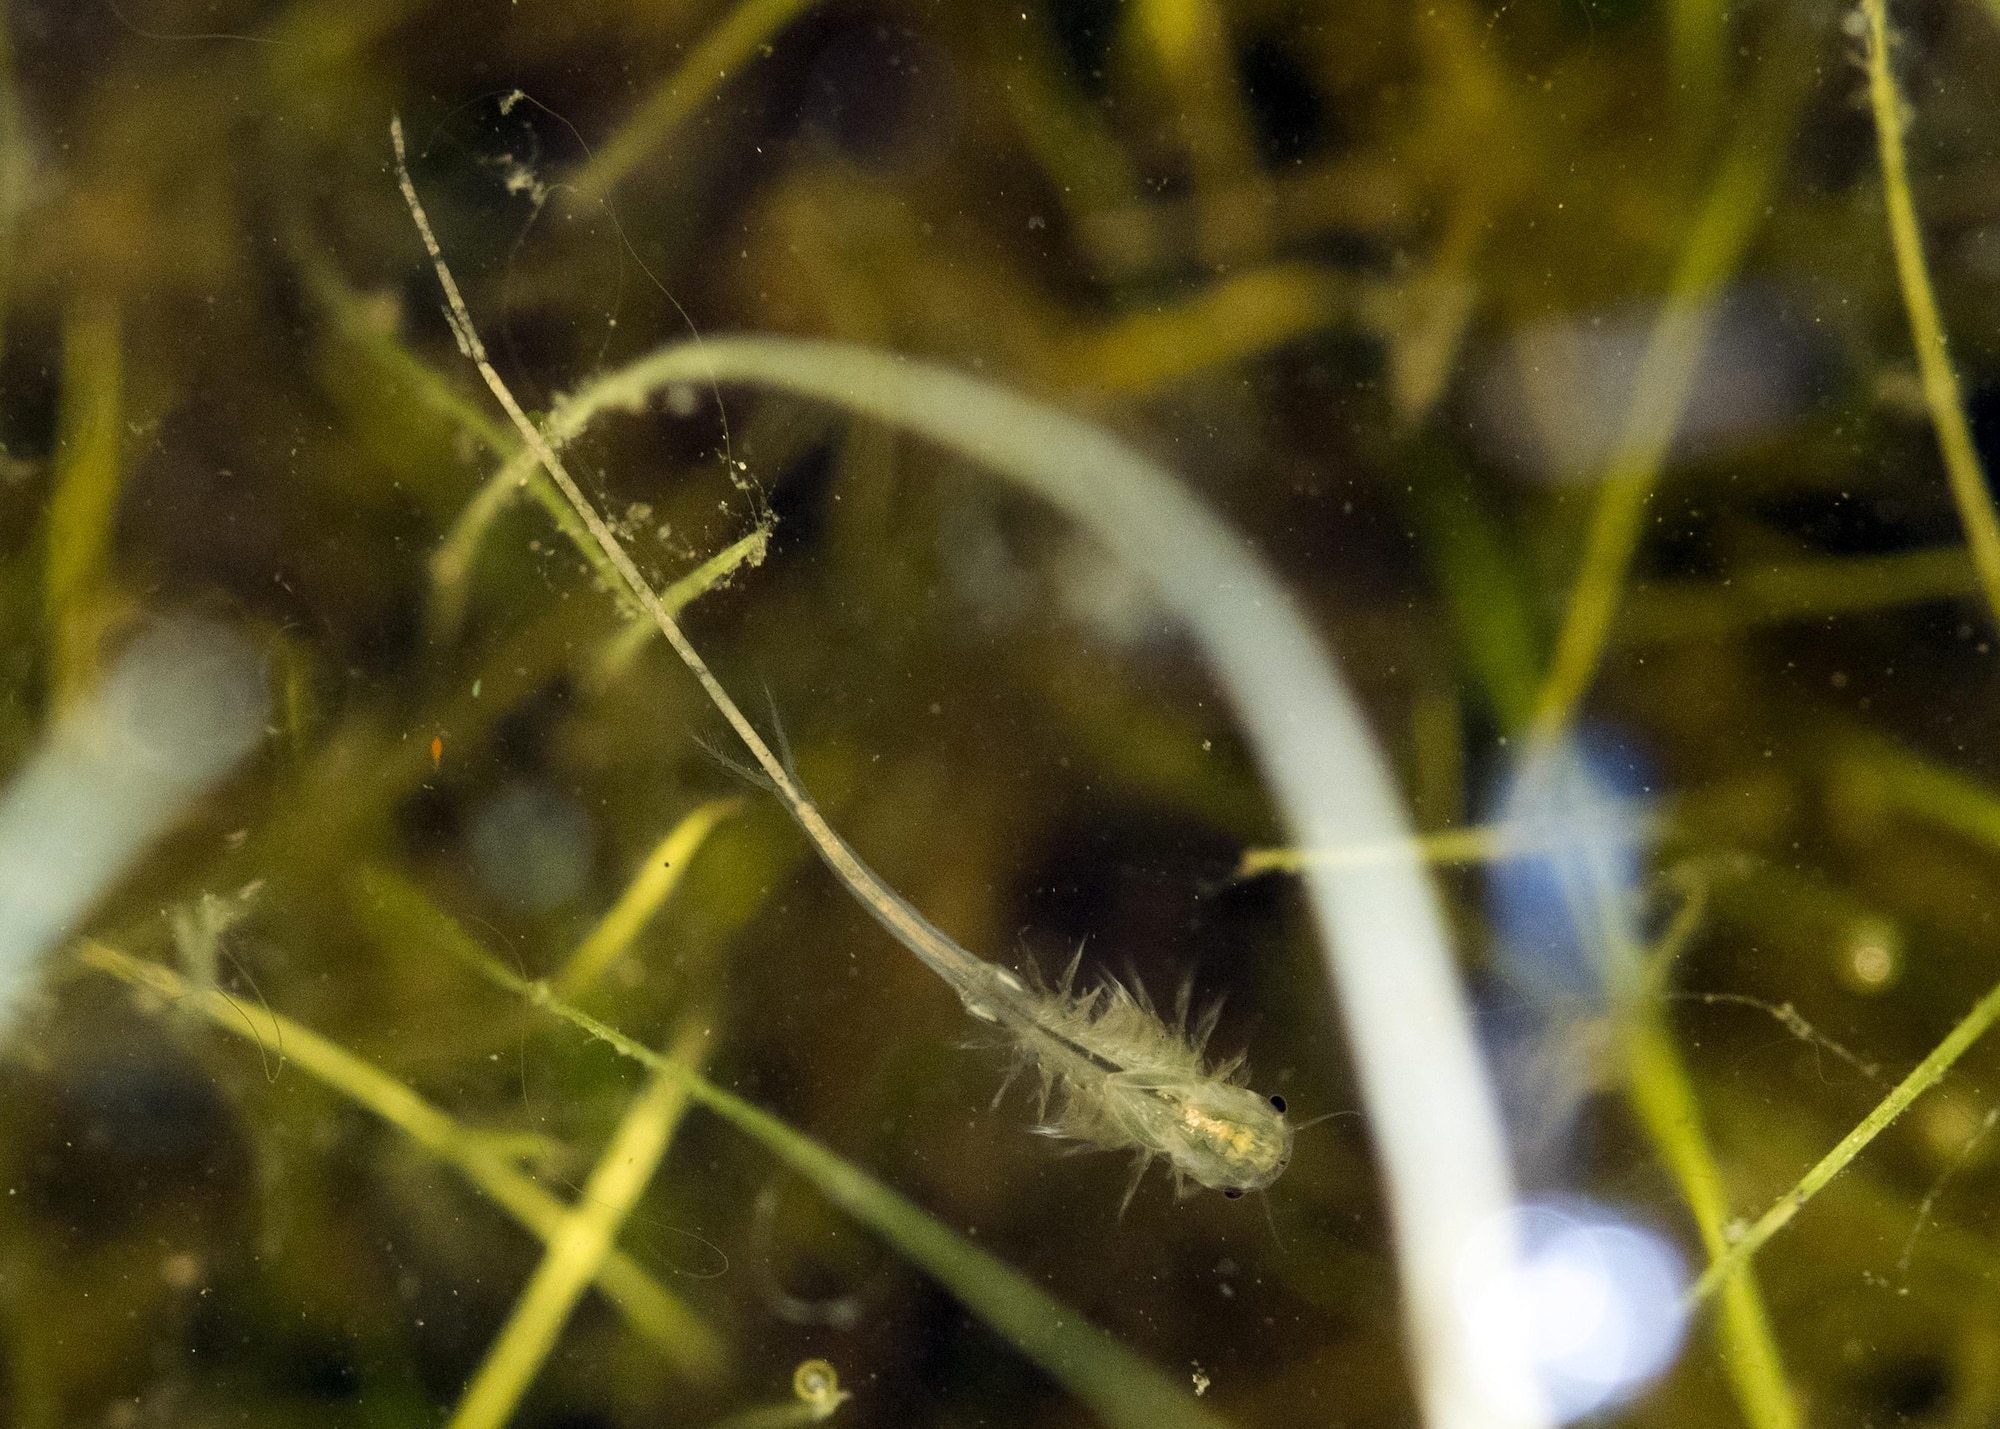 Vernal pool fairy shrimp swim through the waters of an ephemeral pond Feb. 13, 2017 at Travis Air Force Base, Calif. Less than 2.5 centimeters (1 inch) in length, this threatened species hatches when the first rains fill the vernal pools on base. Toward the end of their brief lifetime, females produce thick-shelled “resting eggs” also known as cysts. During the dry season, these cysts become embedded in the dried mud and can lay dormant for long periods, until there is enough water to once again fill the pool. (U.S. Air Force photo/Heide Couch)